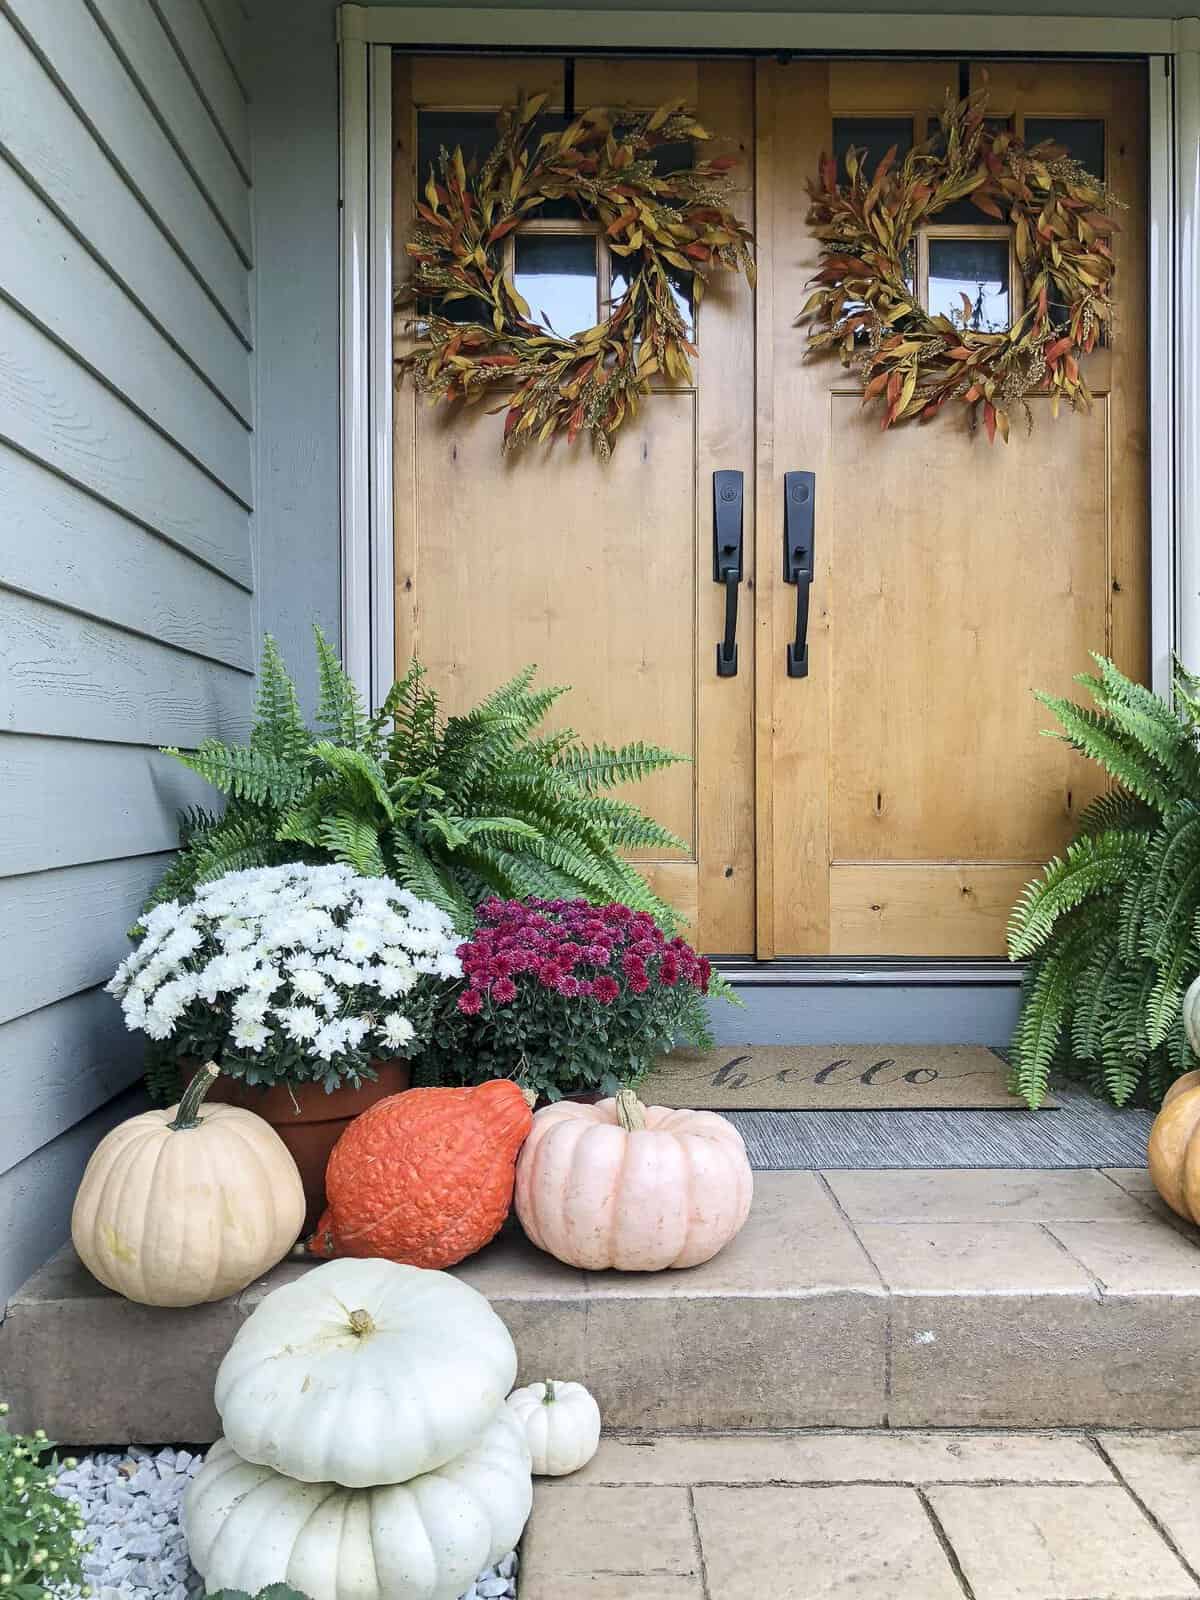 Click here to learn 3 easy steps for how to incorporate nature into your fall porch decor to create a beautiful, colorful and inviting fall front porch.